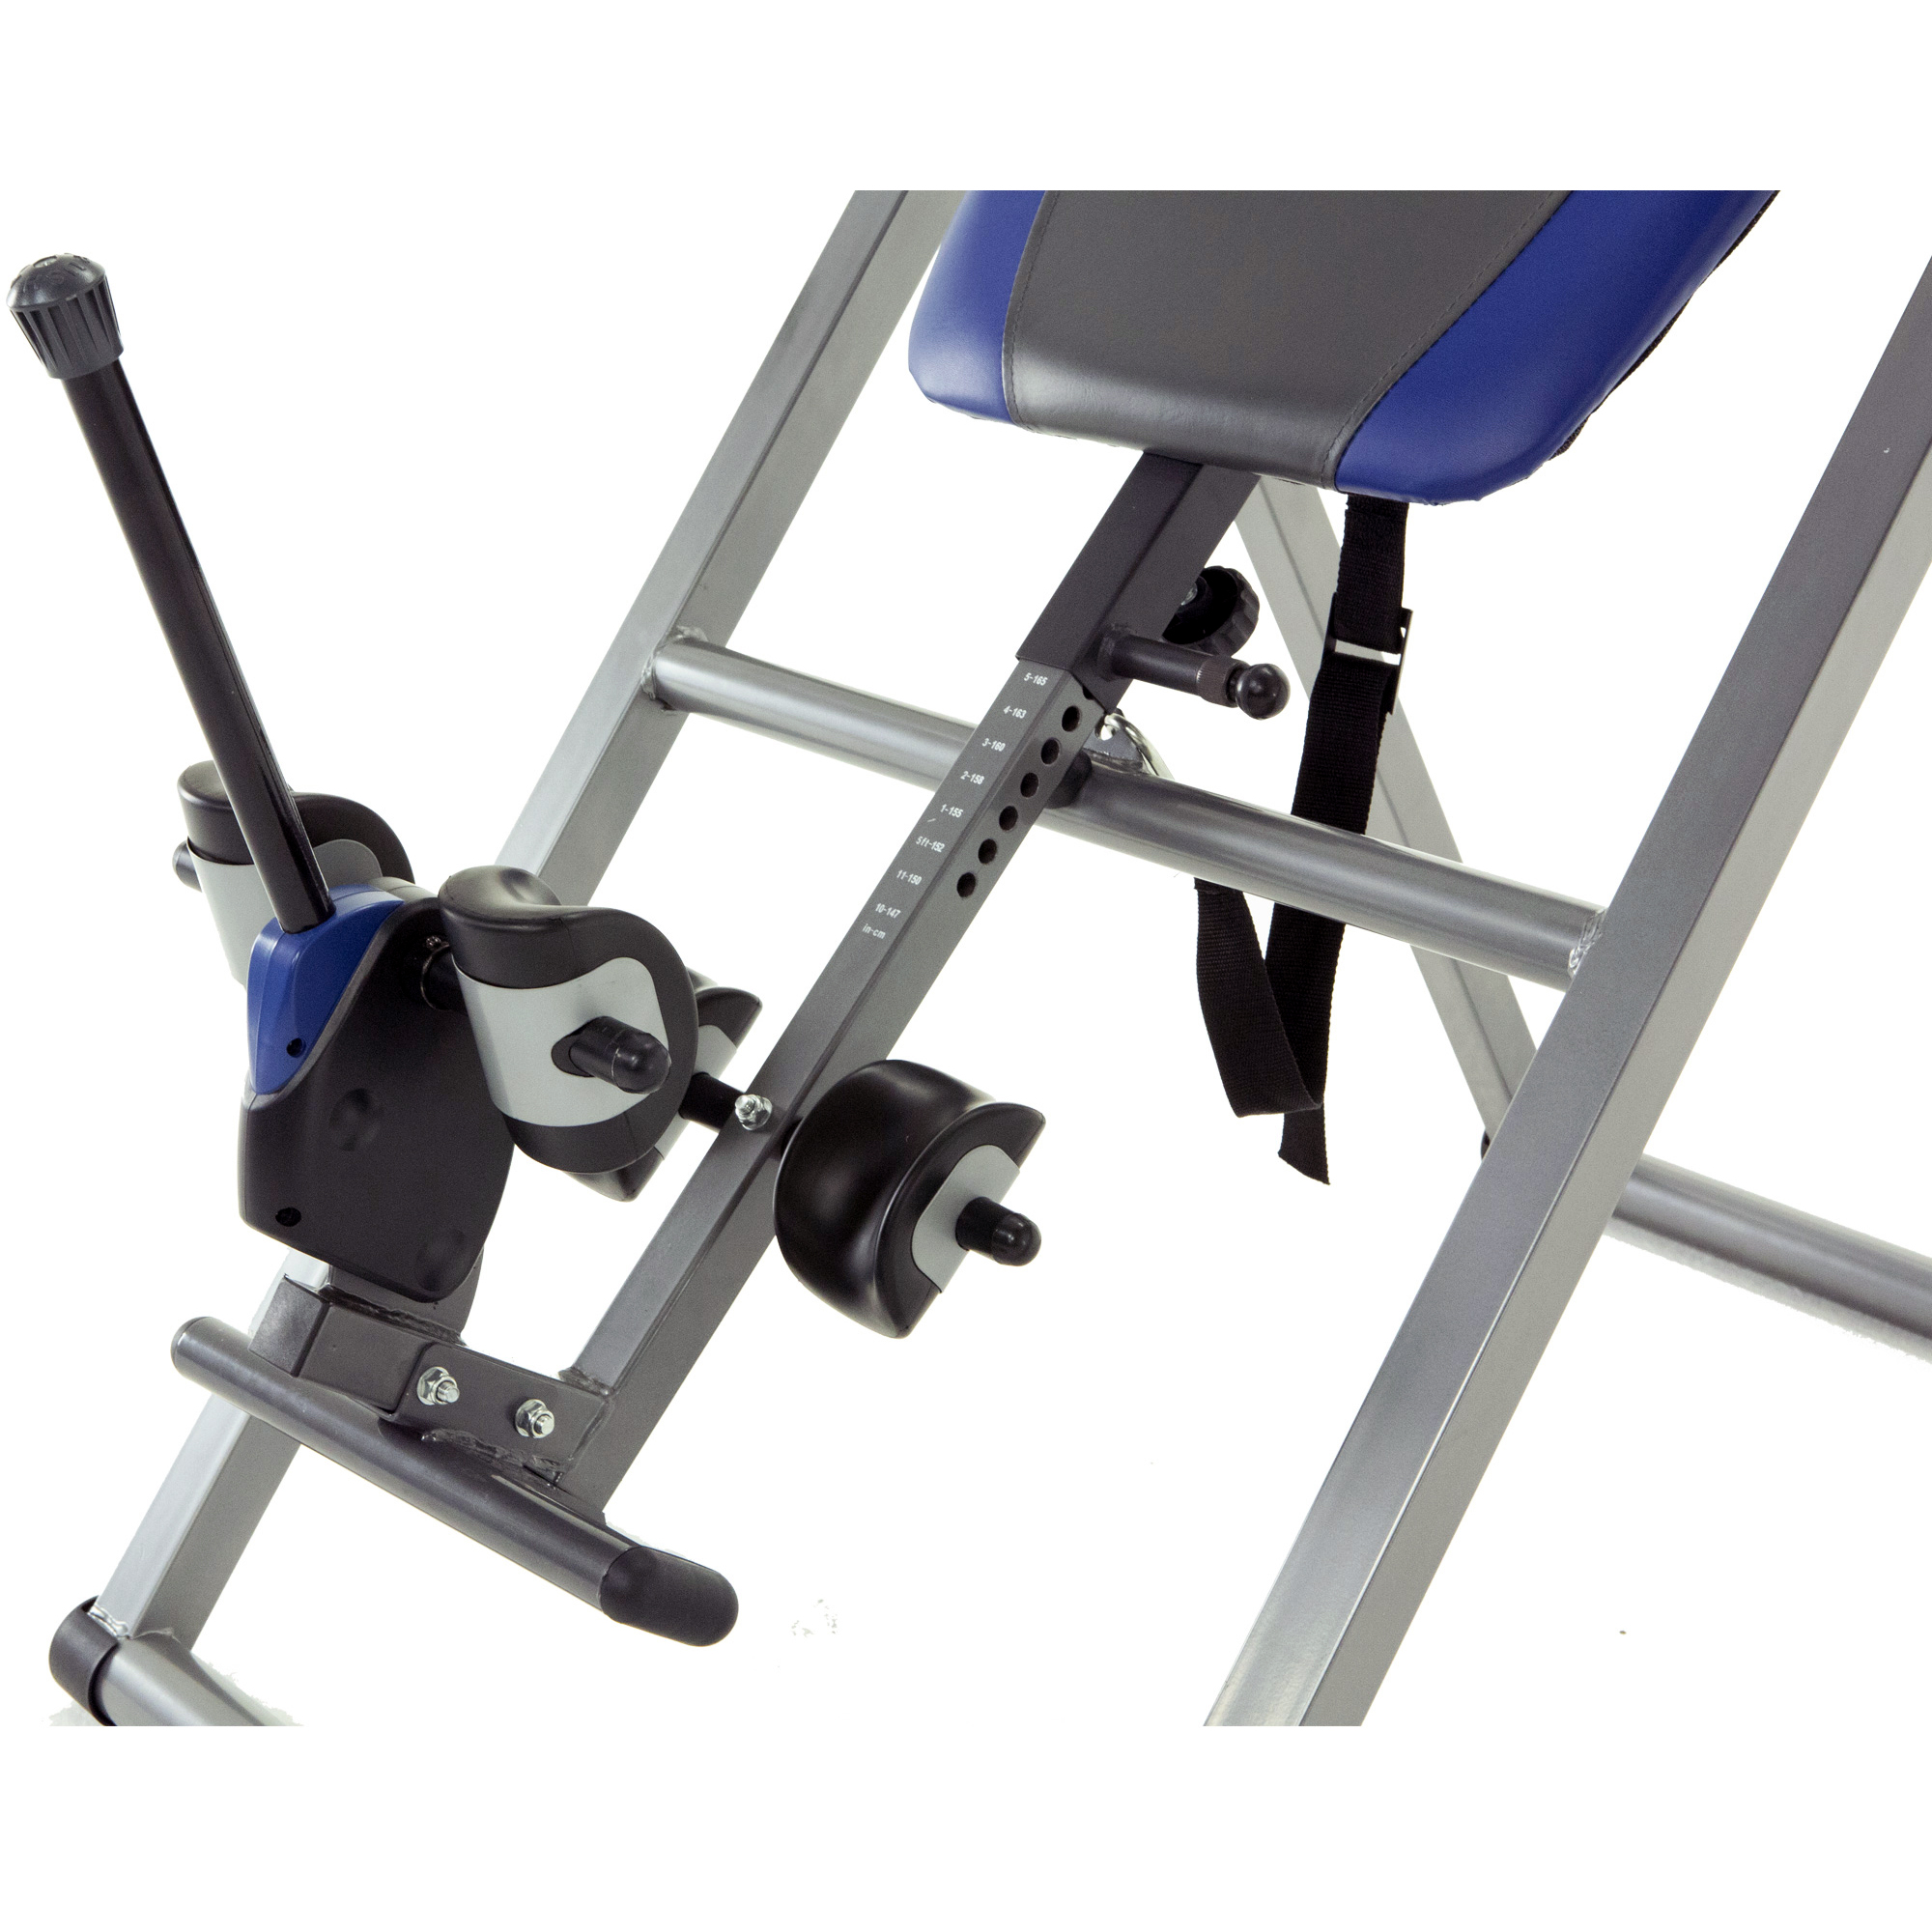 Ironman Fitness Essex 990SL Inversion Table with Unique Sure lock System - image 4 of 19